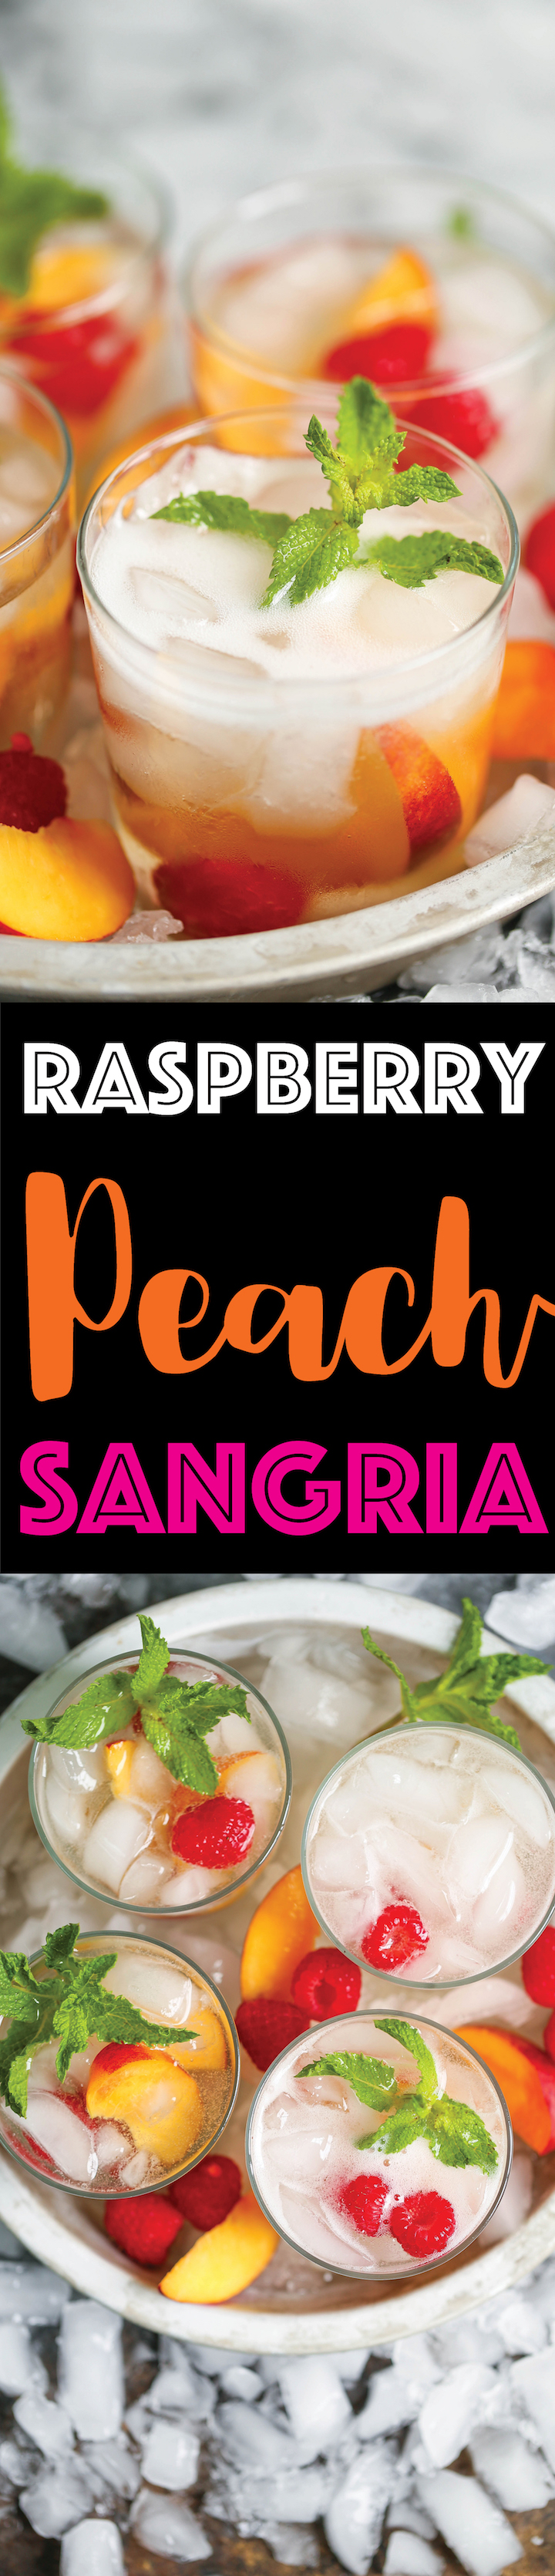 Raspberry Peach Sangria - The perfect make-ahead cocktail for any occasion! Takes literally just 5 min! Let chill and serve with sparkling wine. That's it!